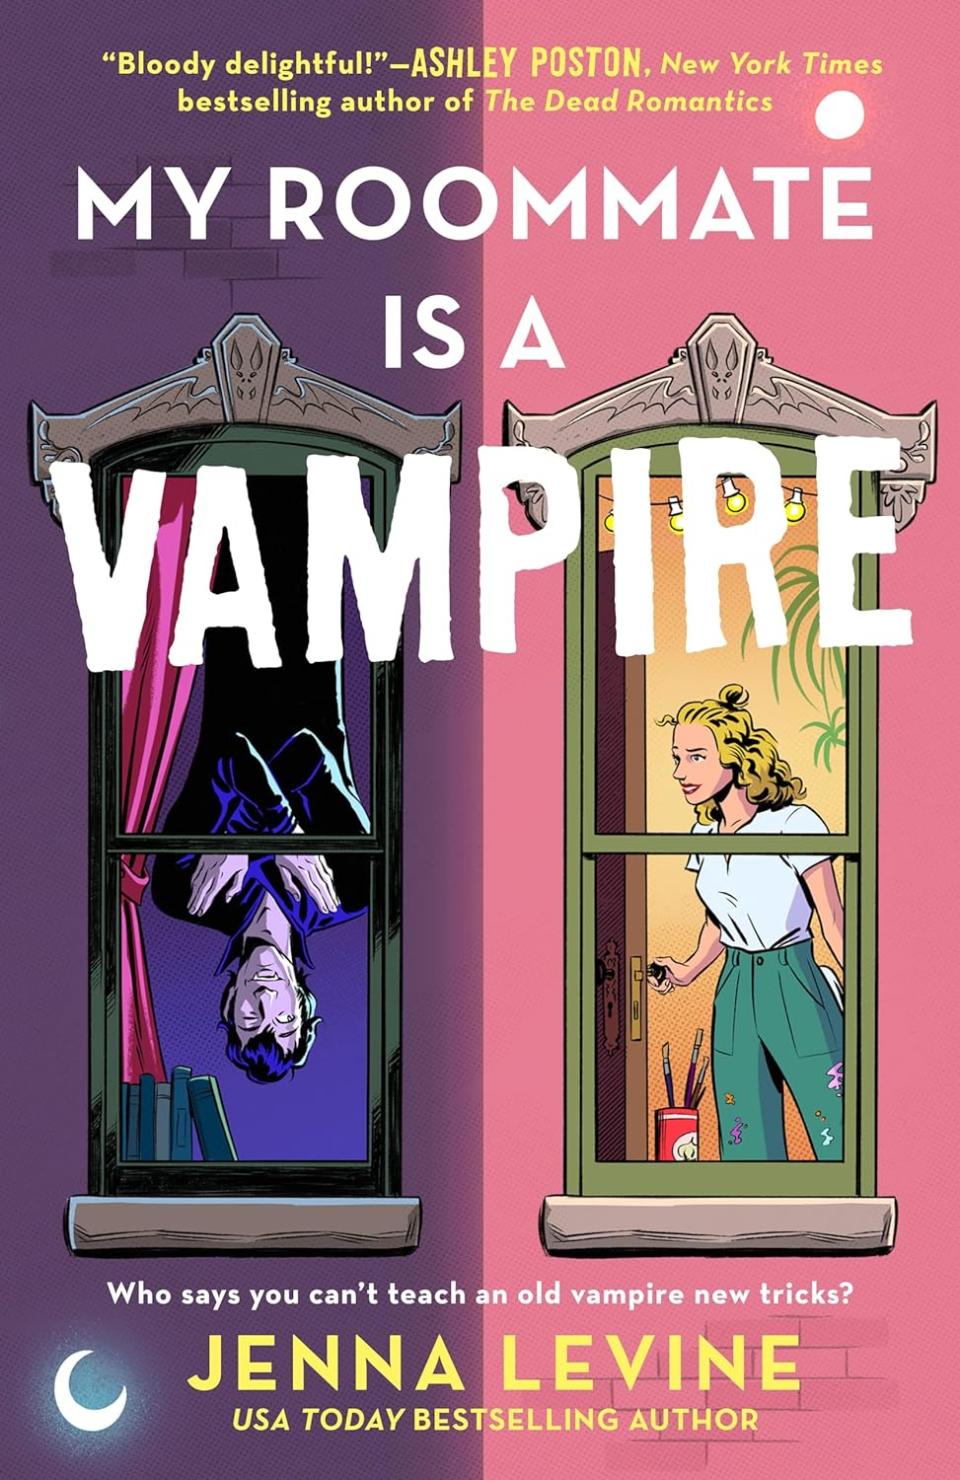 Try My Roommate is a Vampire by Jenna Levine (Halloween Romance books) 